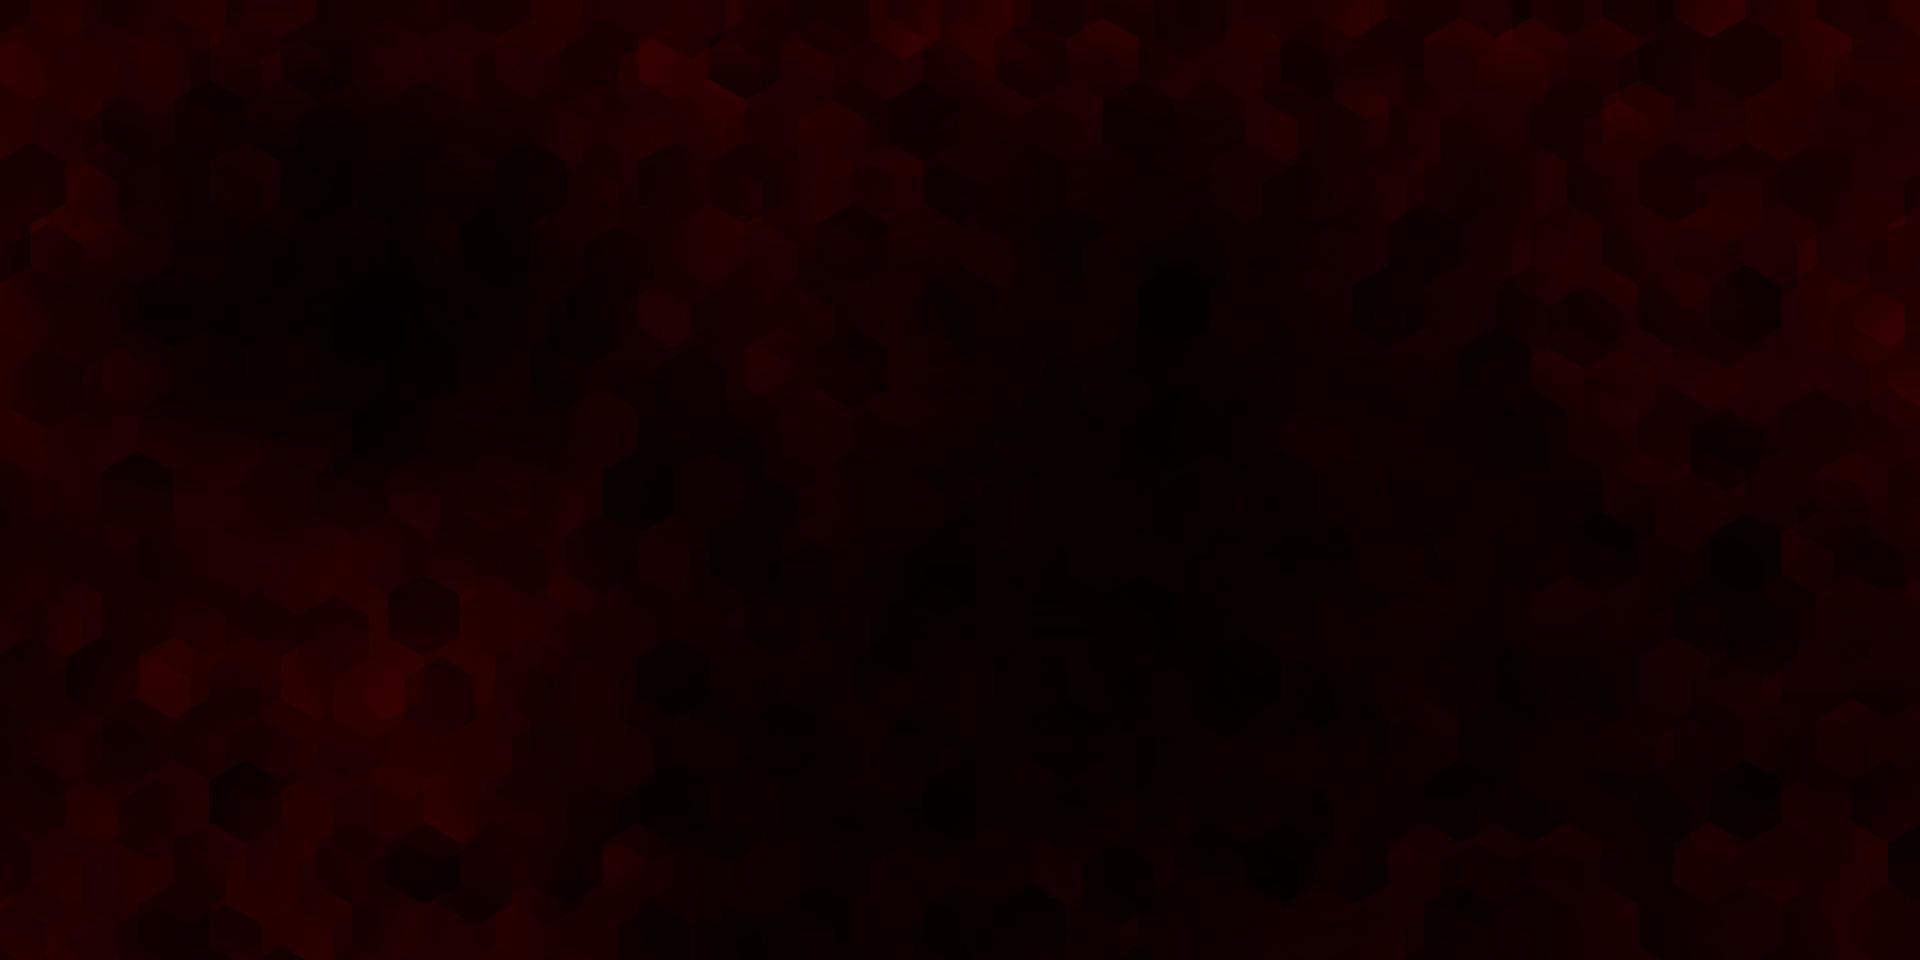 Dark red vector pattern with hexagons.